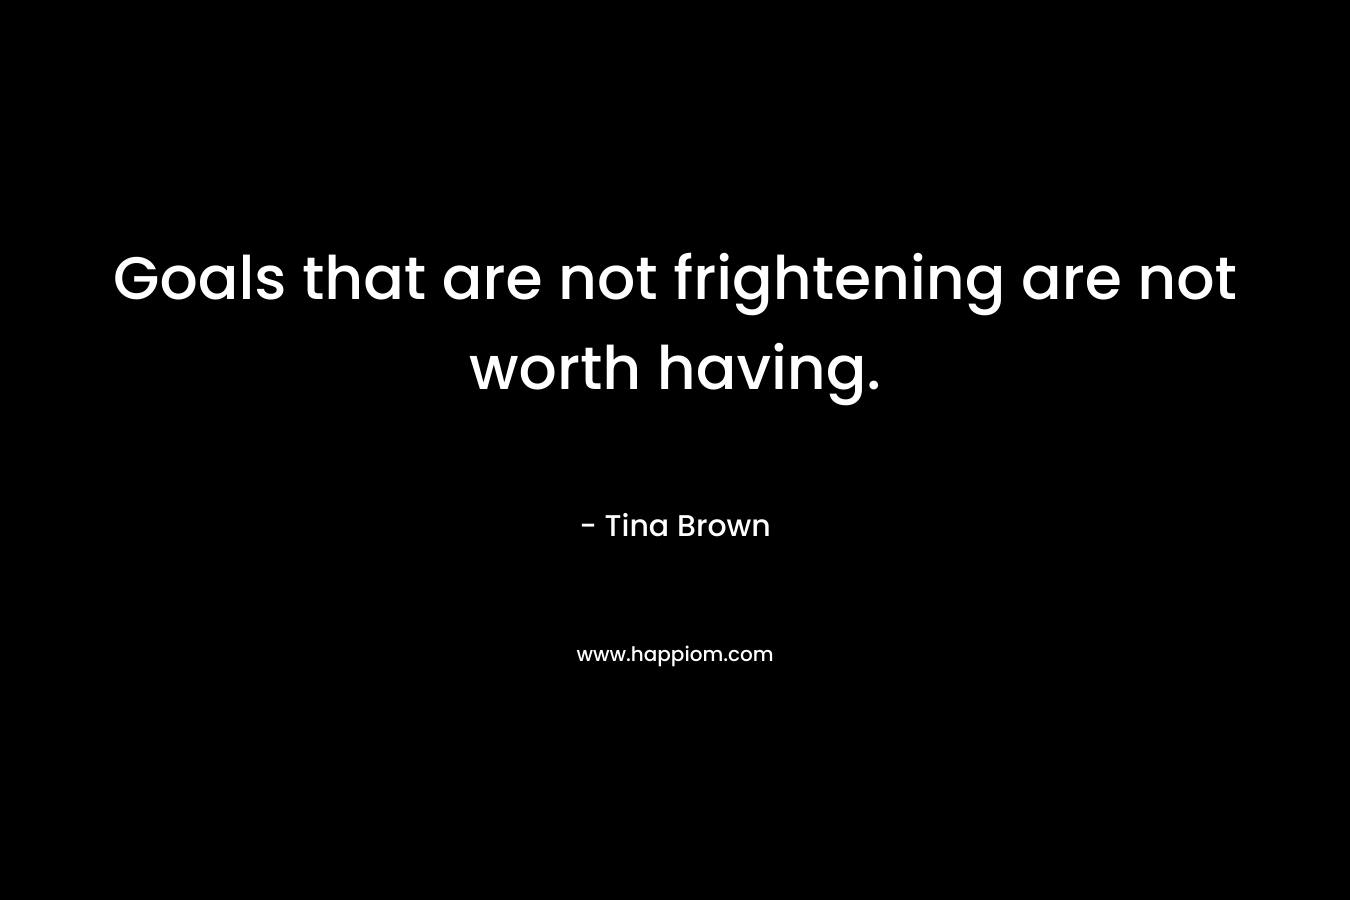 Goals that are not frightening are not worth having. – Tina Brown